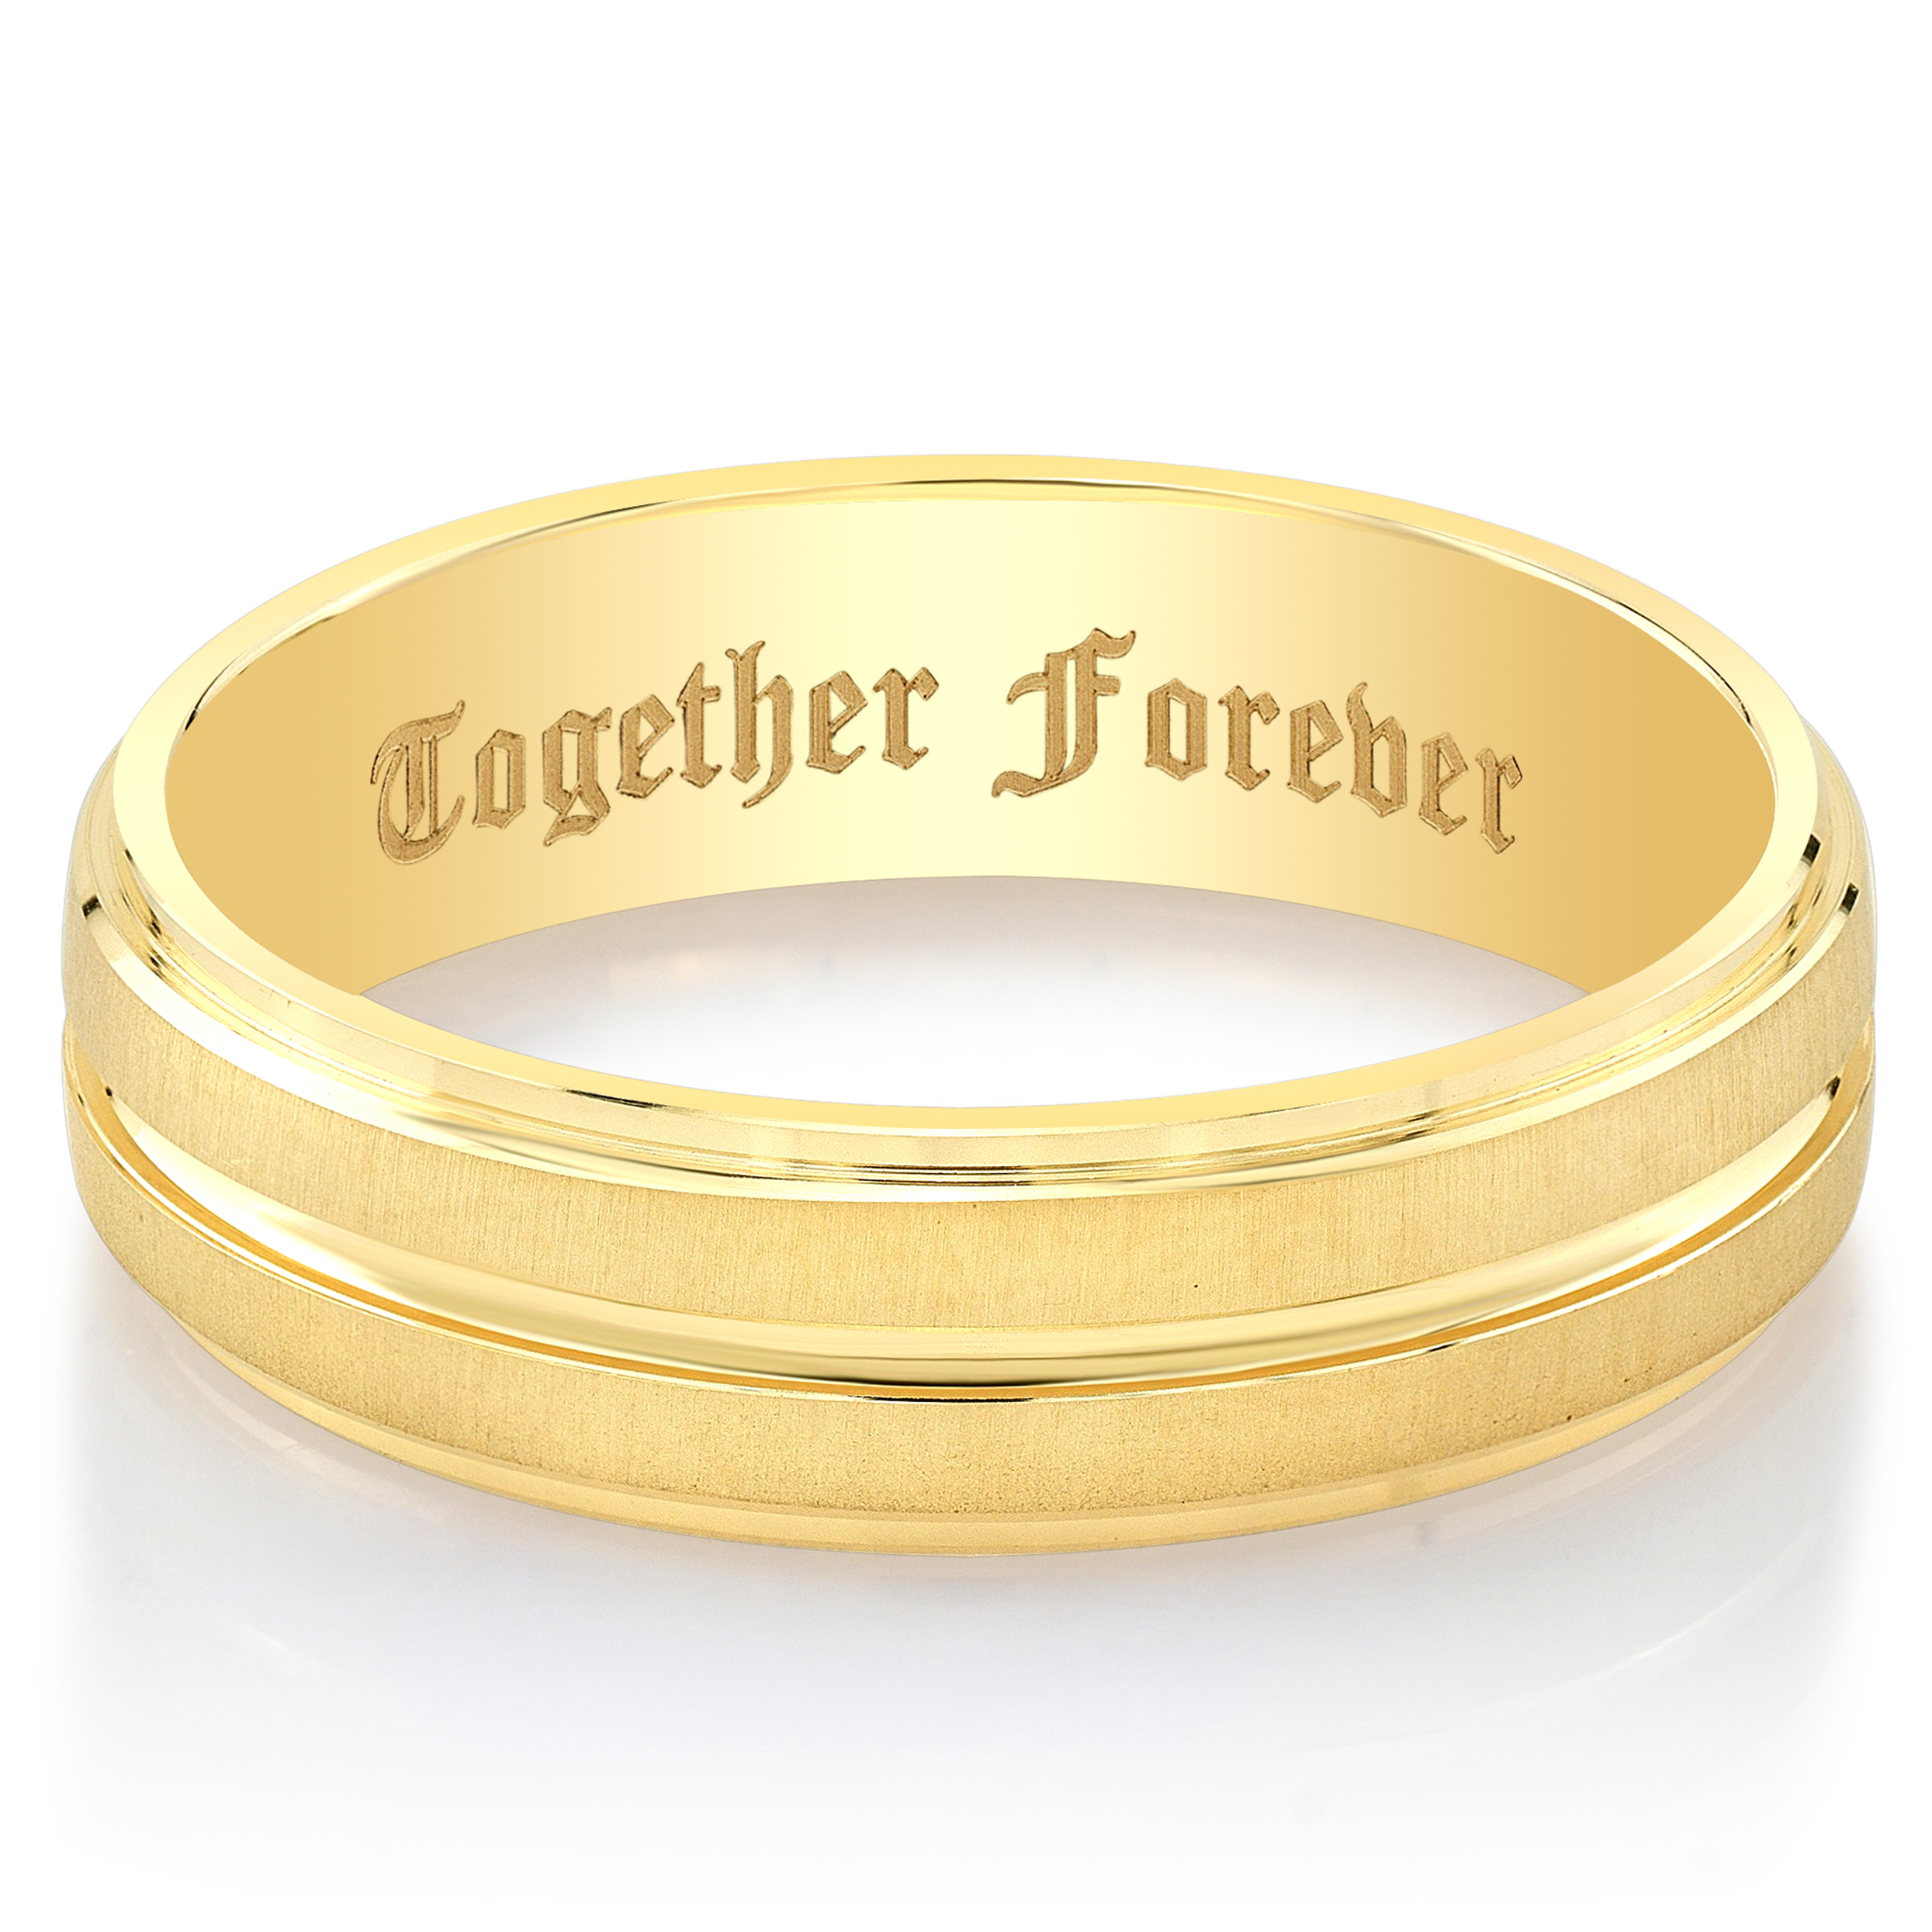 Together Forever Wedding Band. MC014 | Monte Christo Jewelry